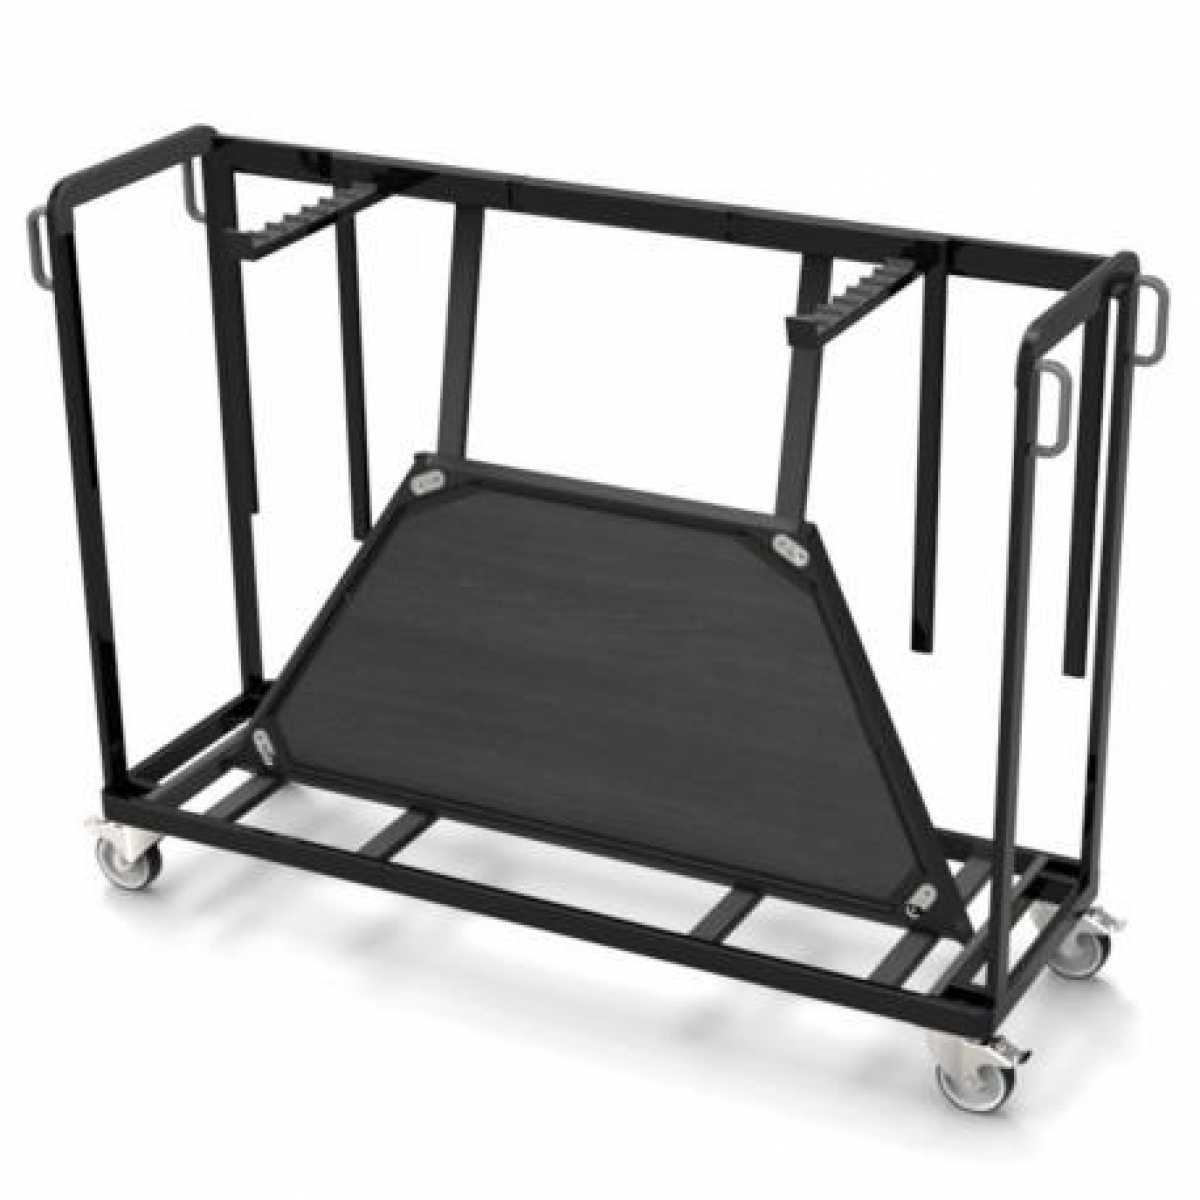 CRASTER 1500 Trapezoid – Trolley